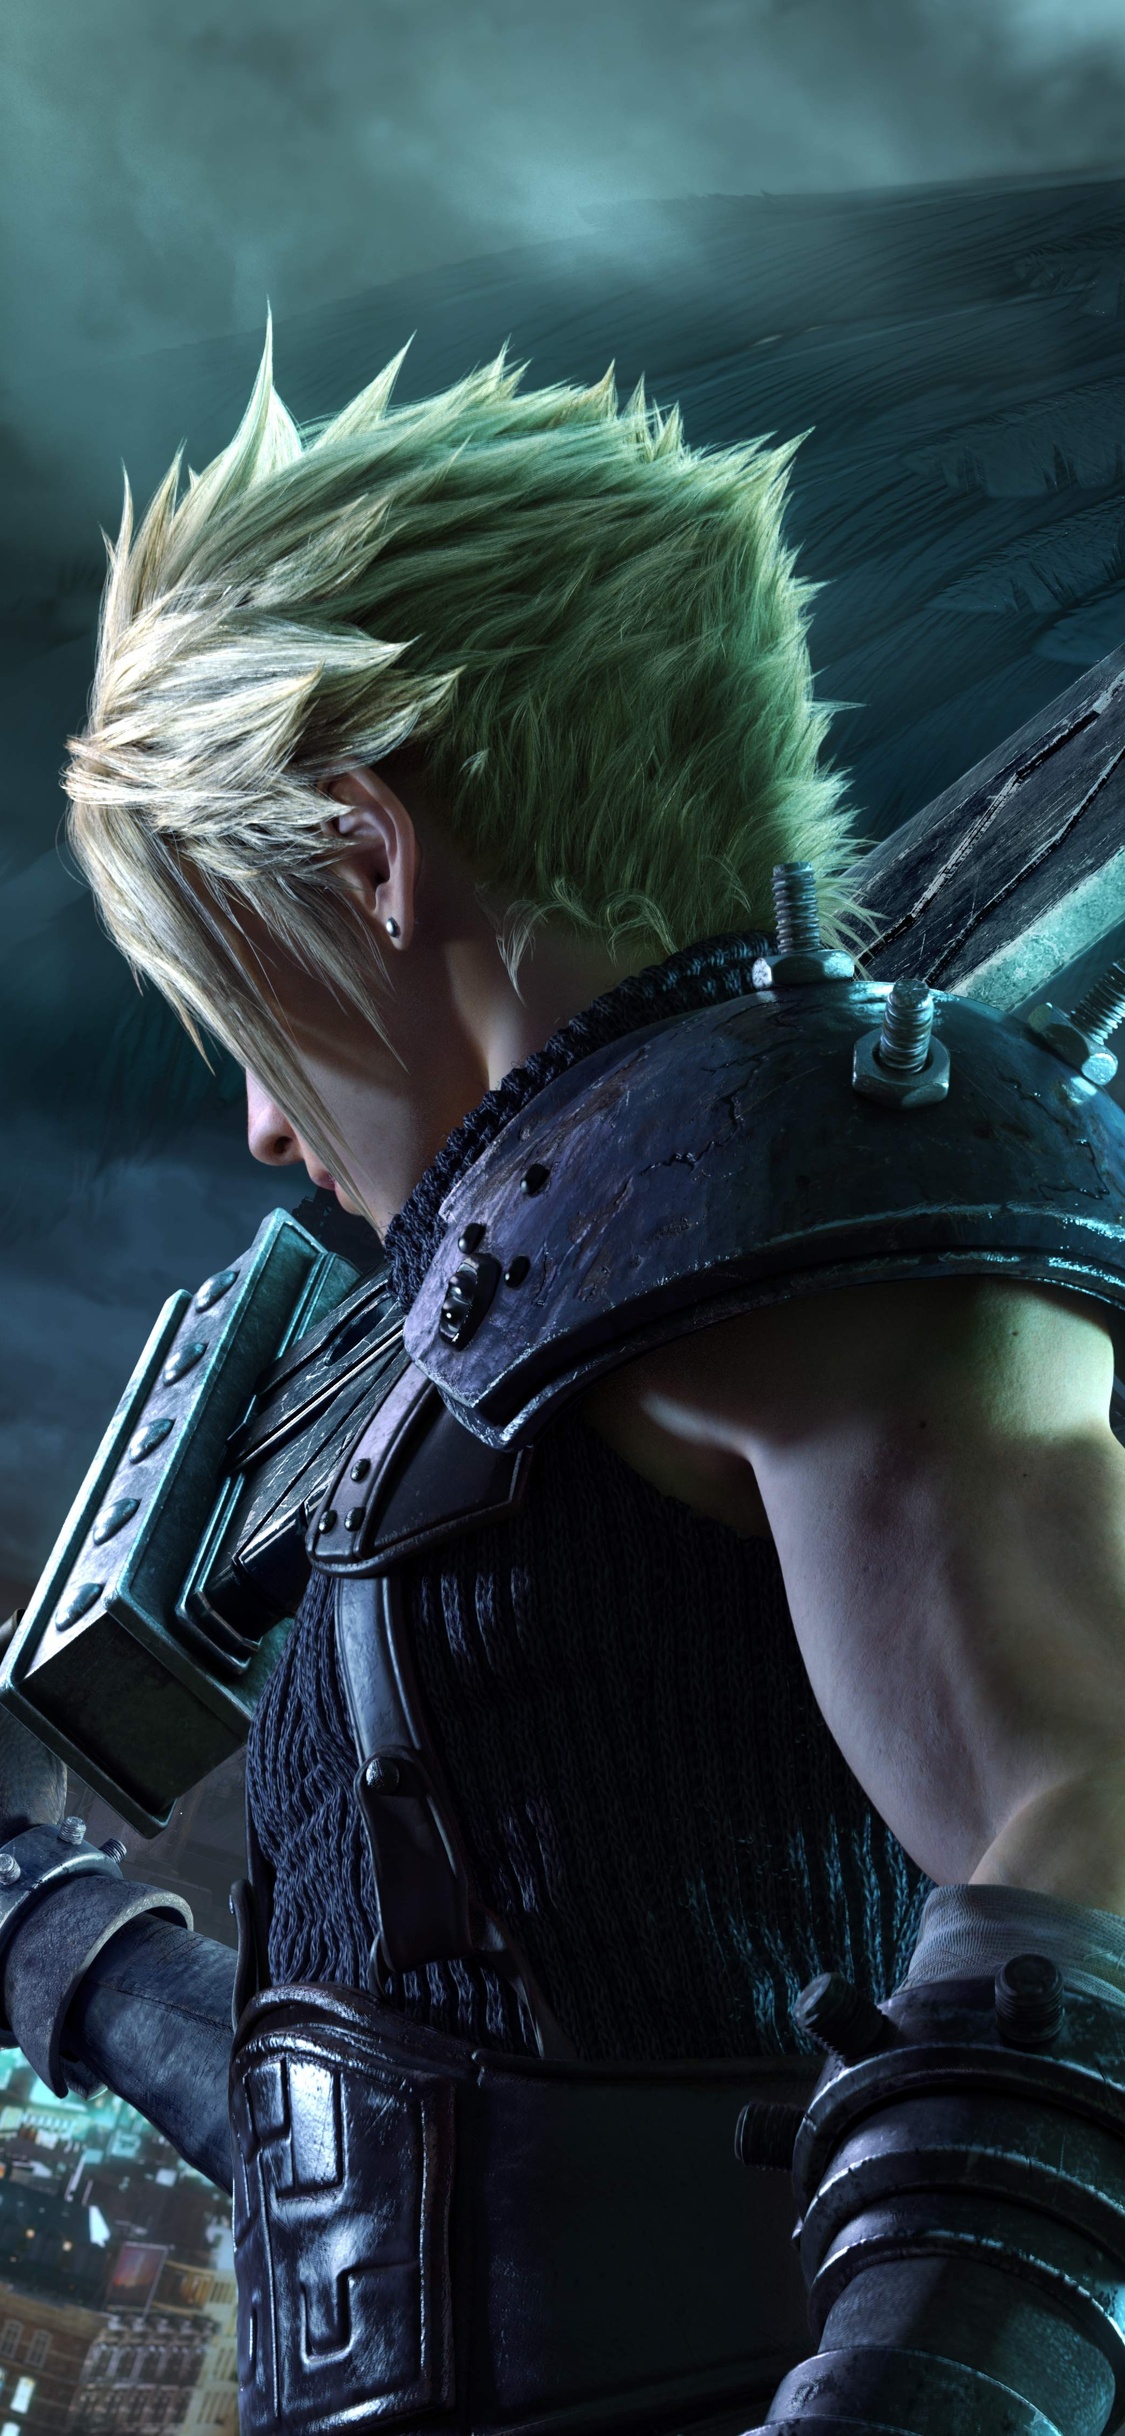 Final Fantasy VII Remake 8k 2020 iPhone XS, iPhone iPhone X HD 4k Wallpaper, Image, Background, Photo and Picture